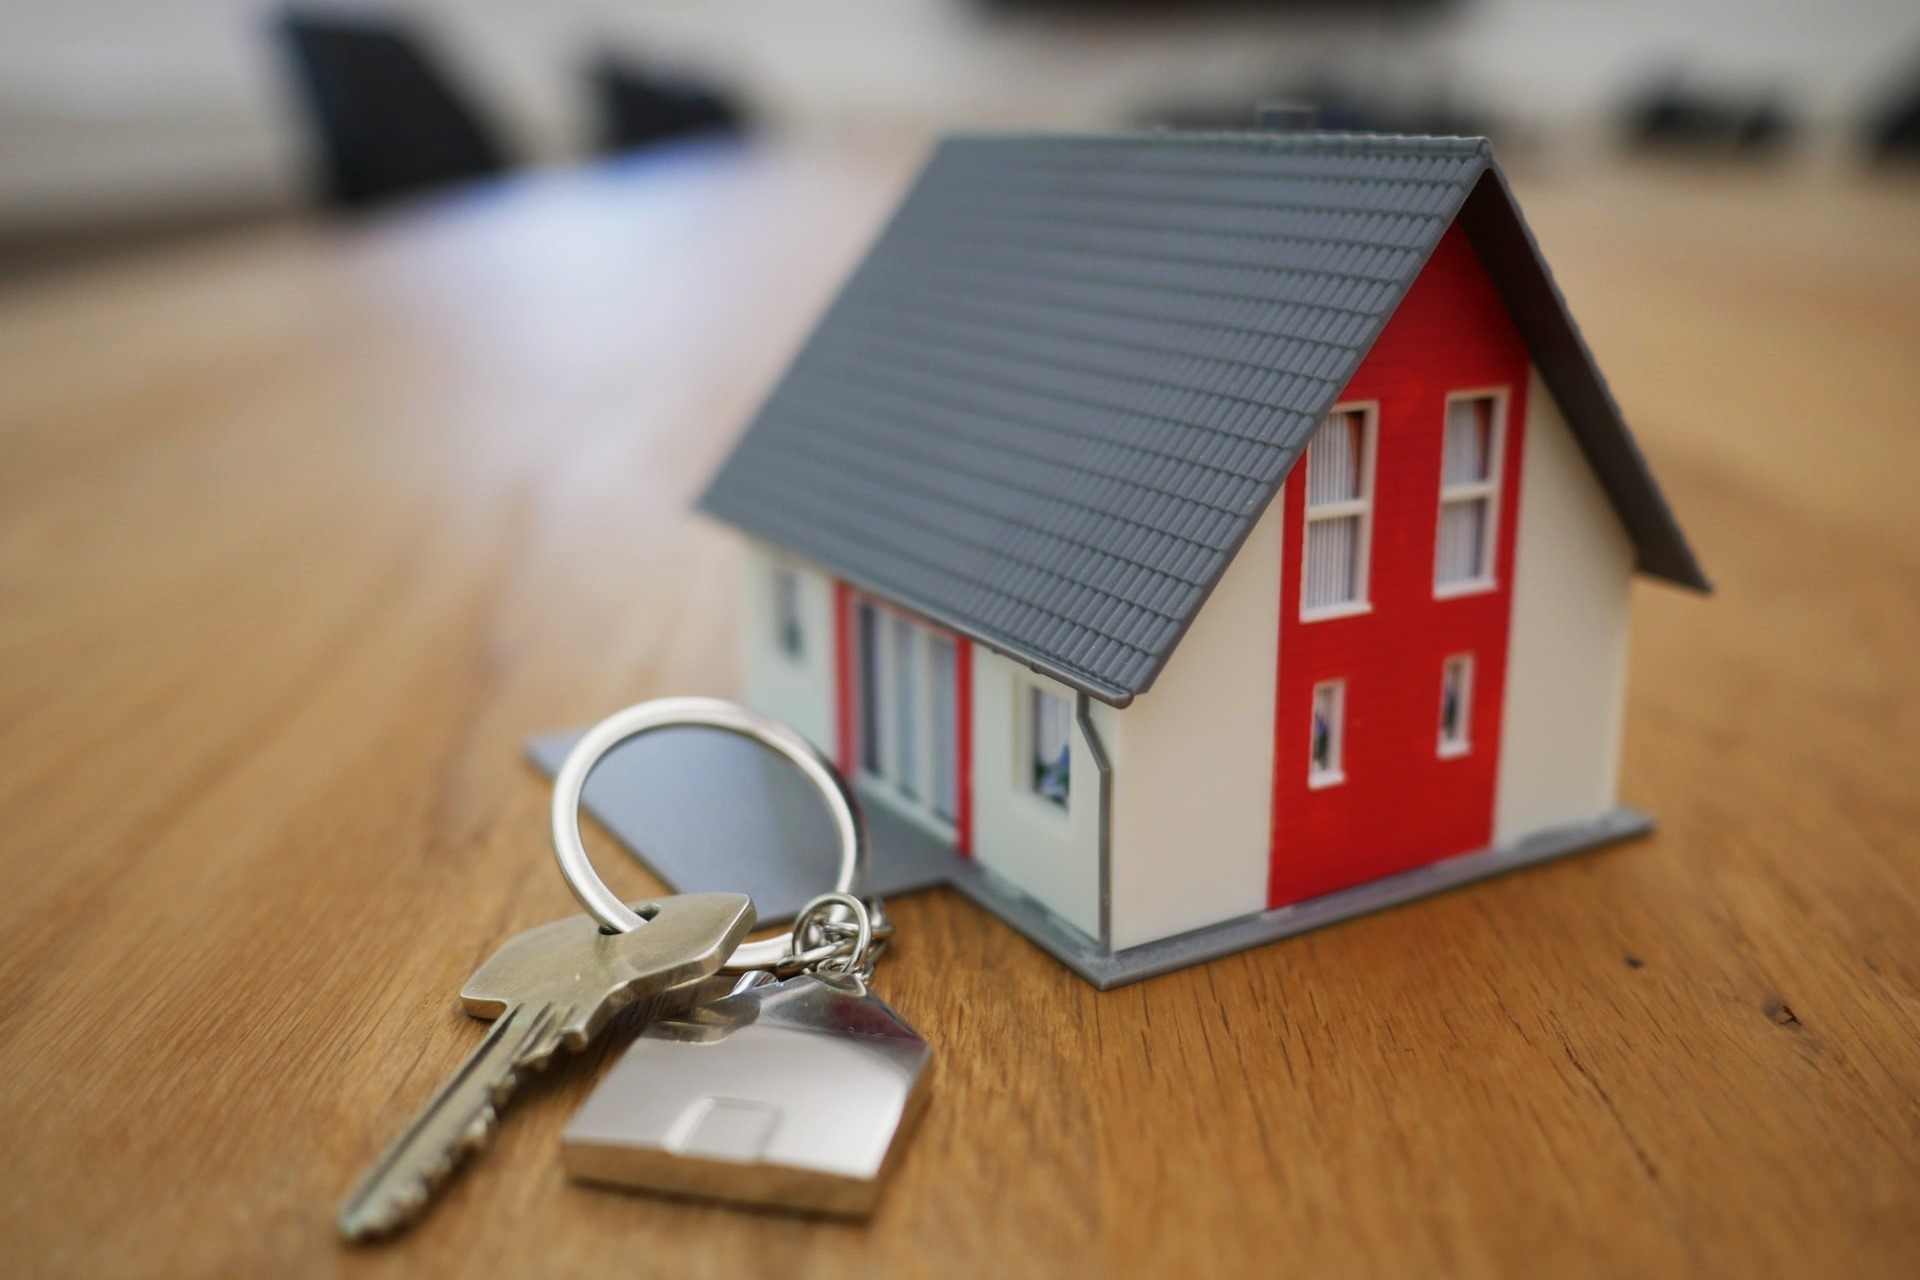 Protect Your Home Title From Theft With Home Title Lock - Does It Really Work? Find Out Now!